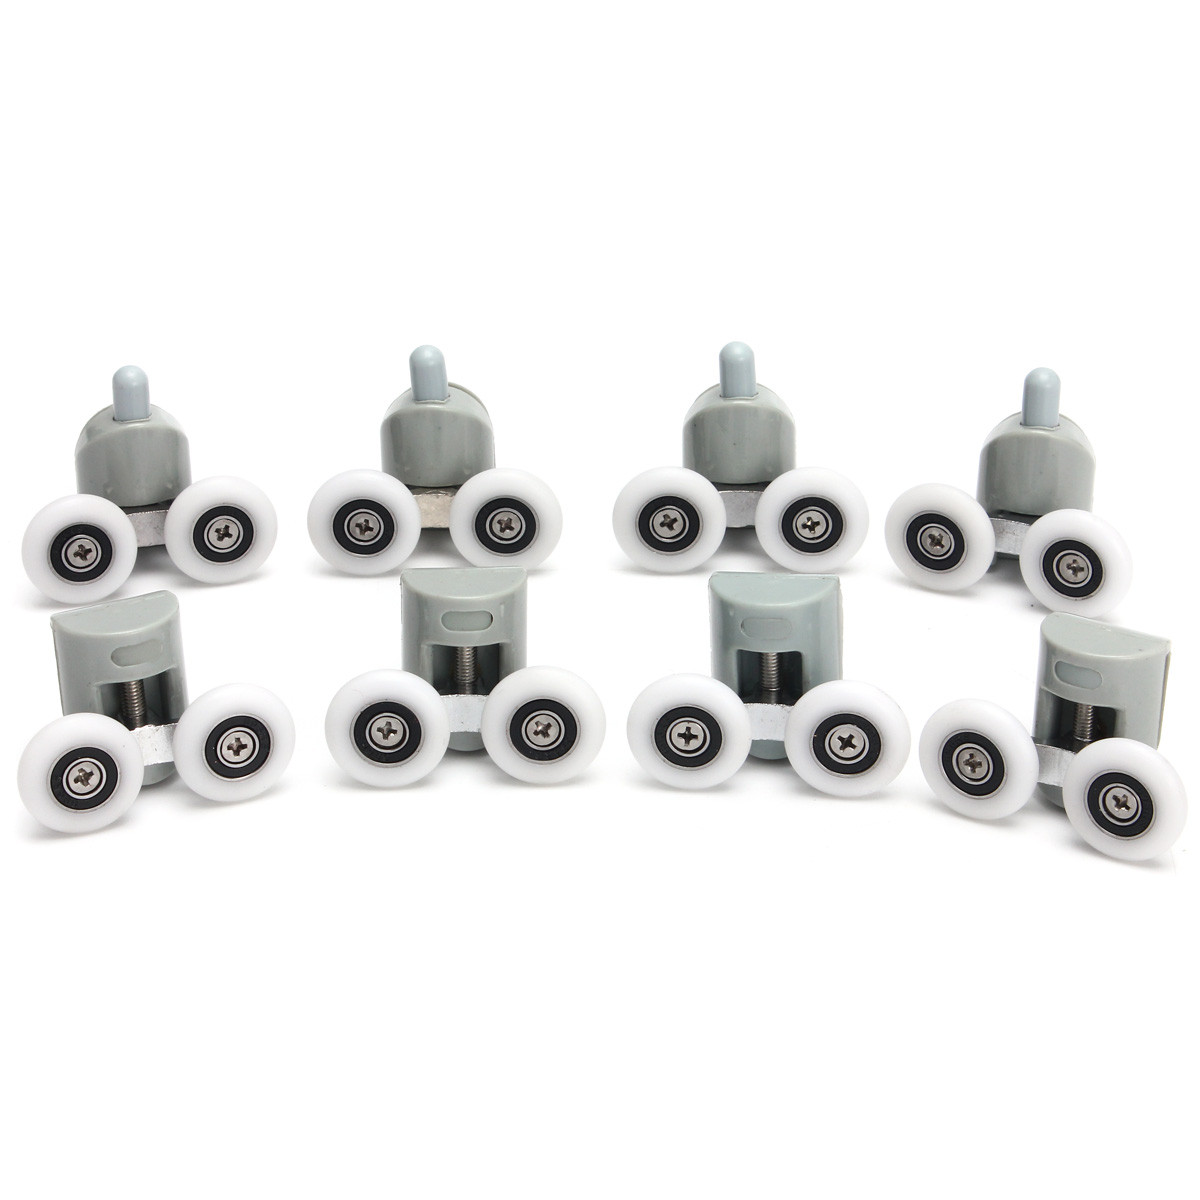 8Pcs Double Sliding Shower Door Rollers Runners Replacement Glass Wheels